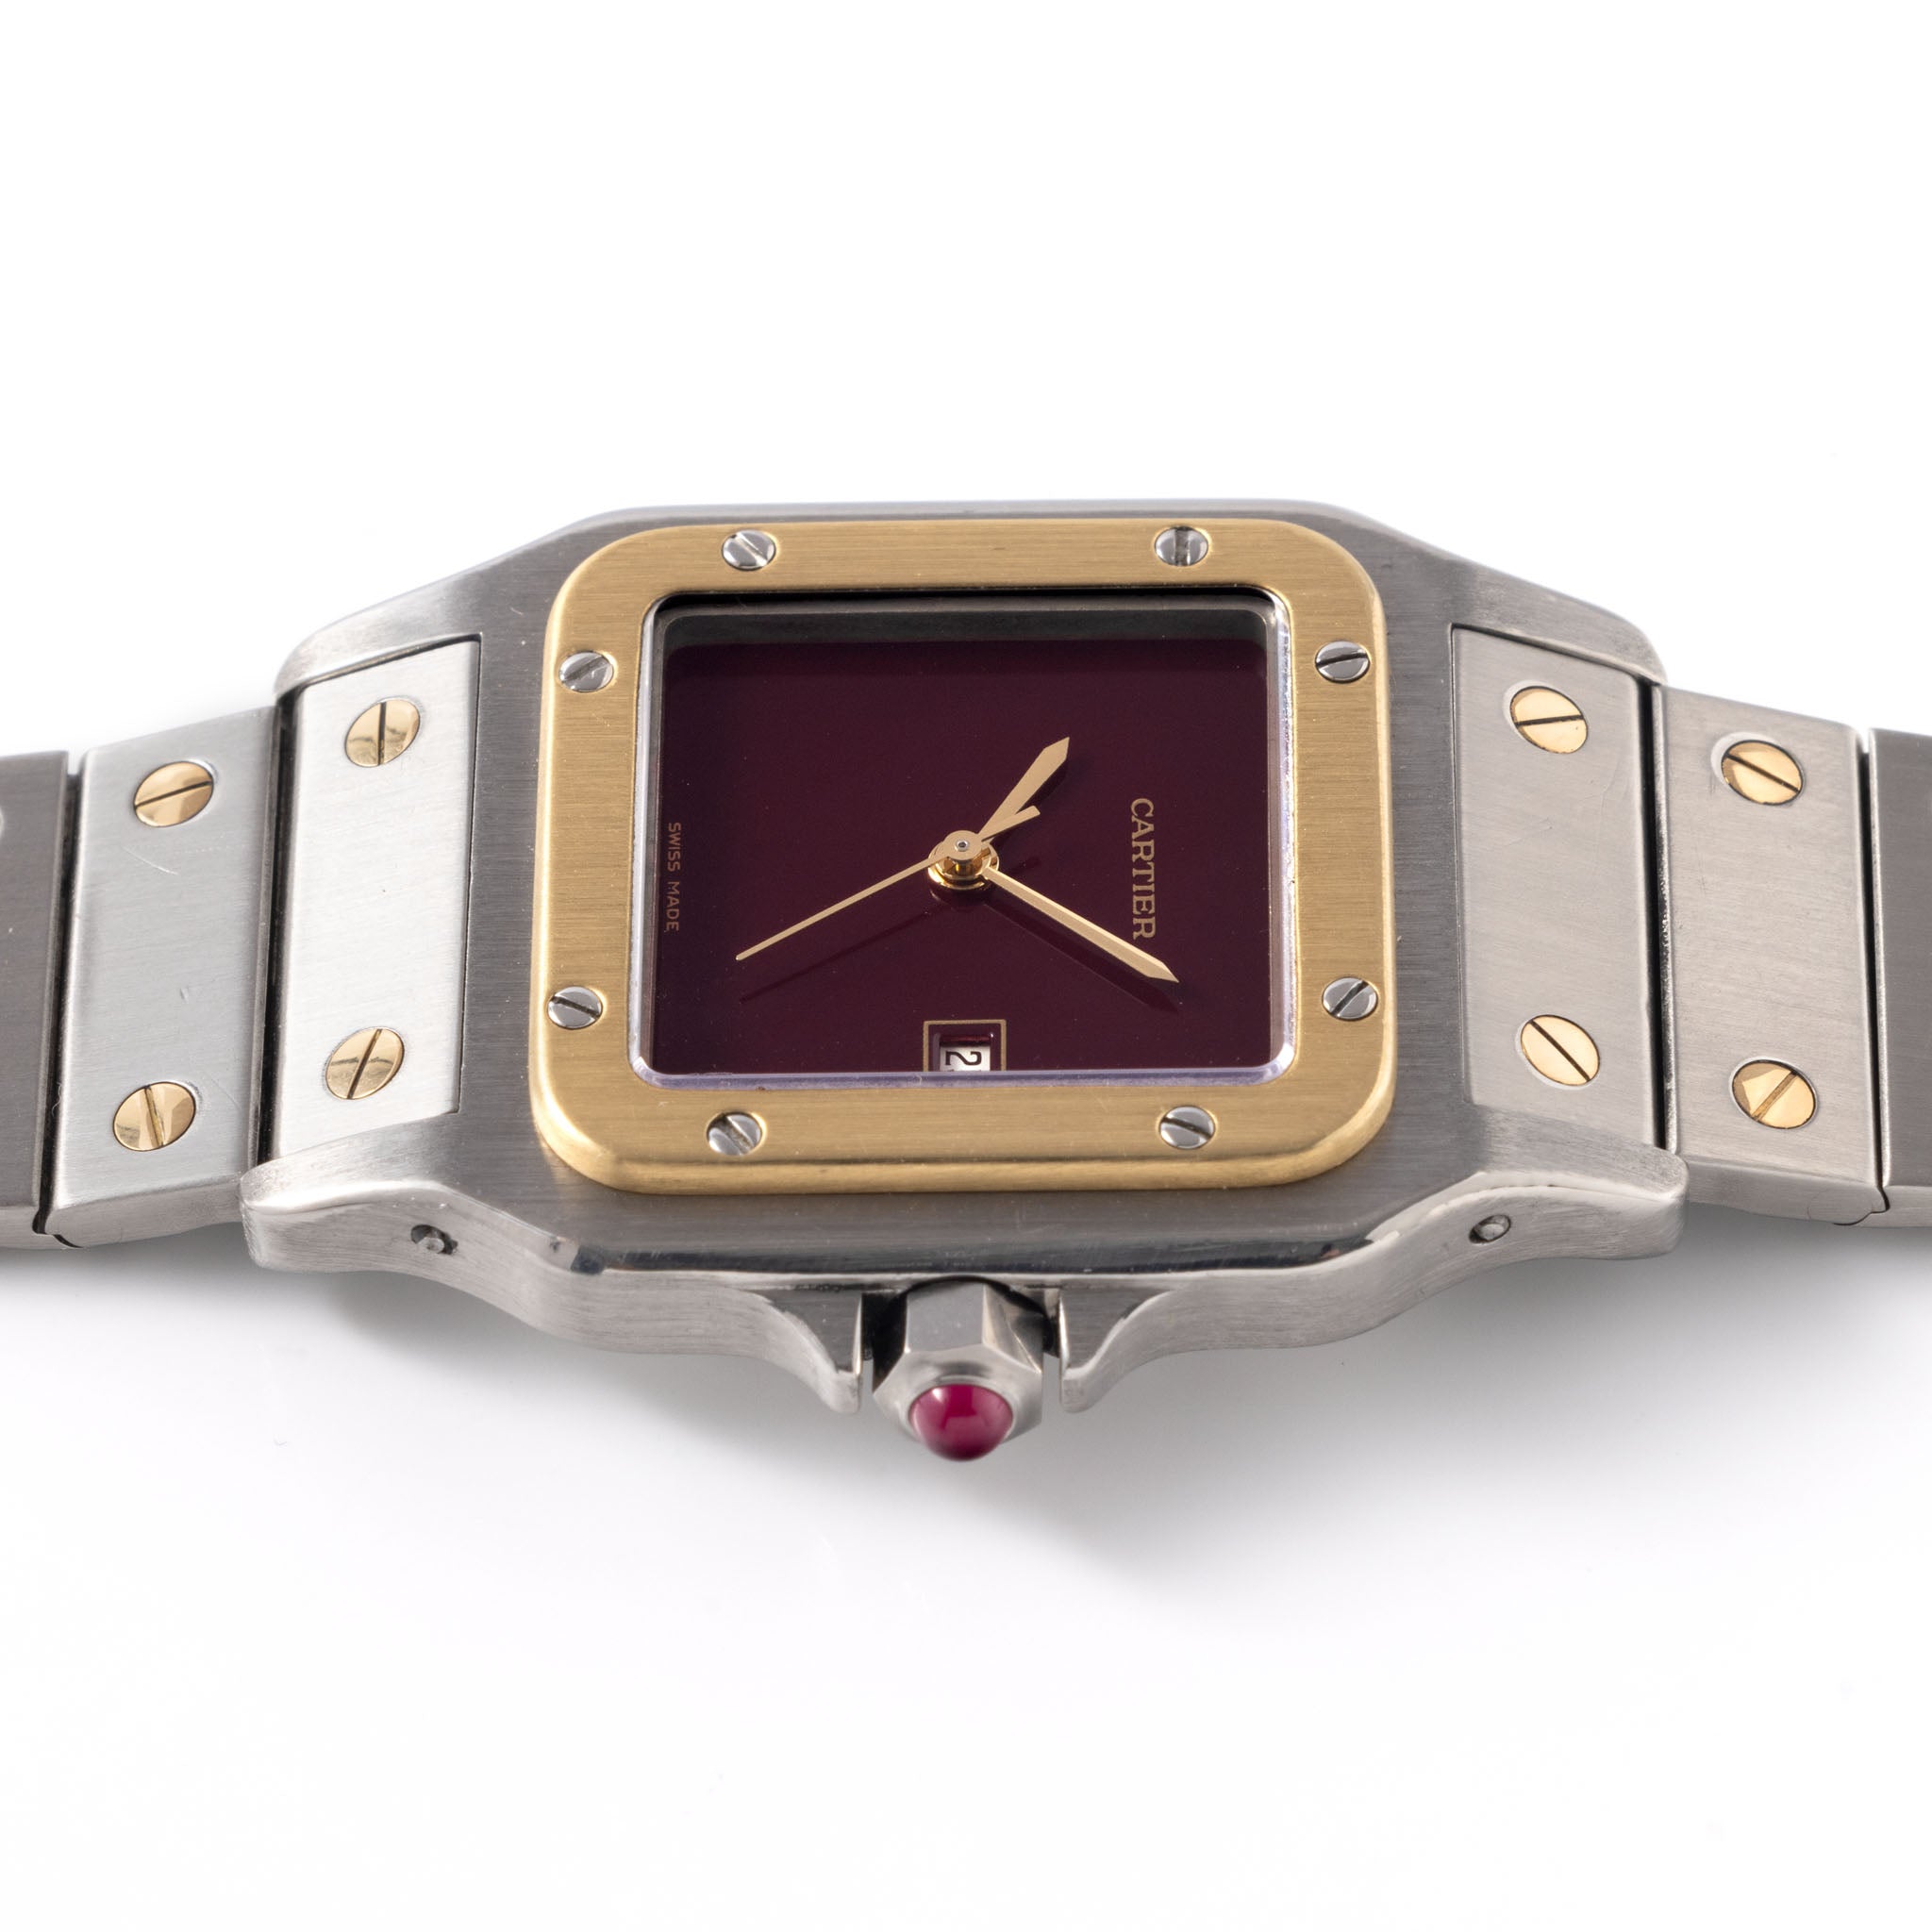 Cartier Santos 2961 Steel and Gold with Burgundy Dial